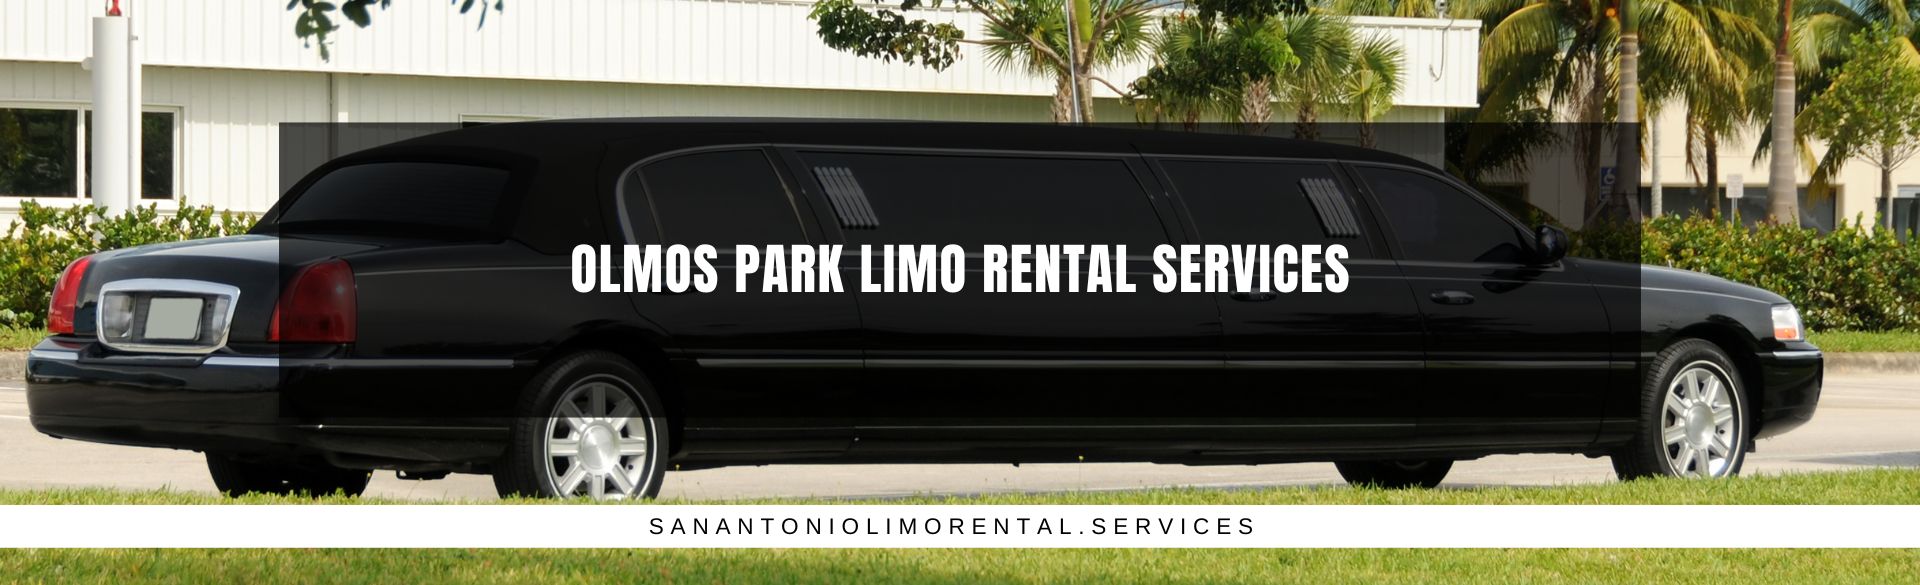 Olmos Park Limo Rental Services